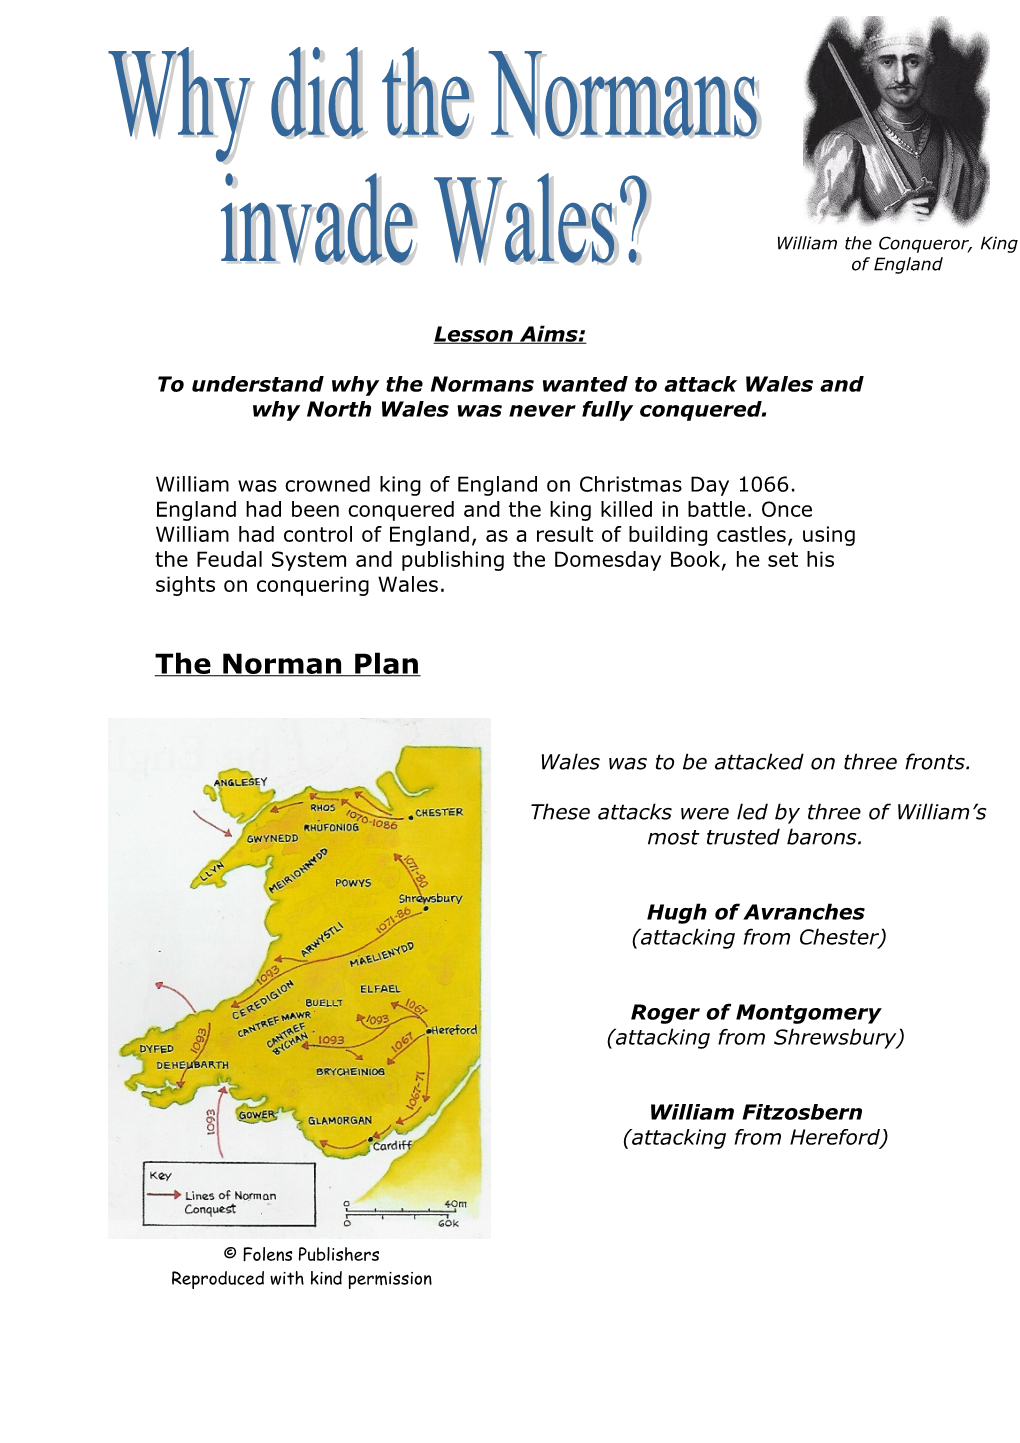 To Understand Why the Normans Wanted to Attack Wales and Why North Wales Was Never Fully